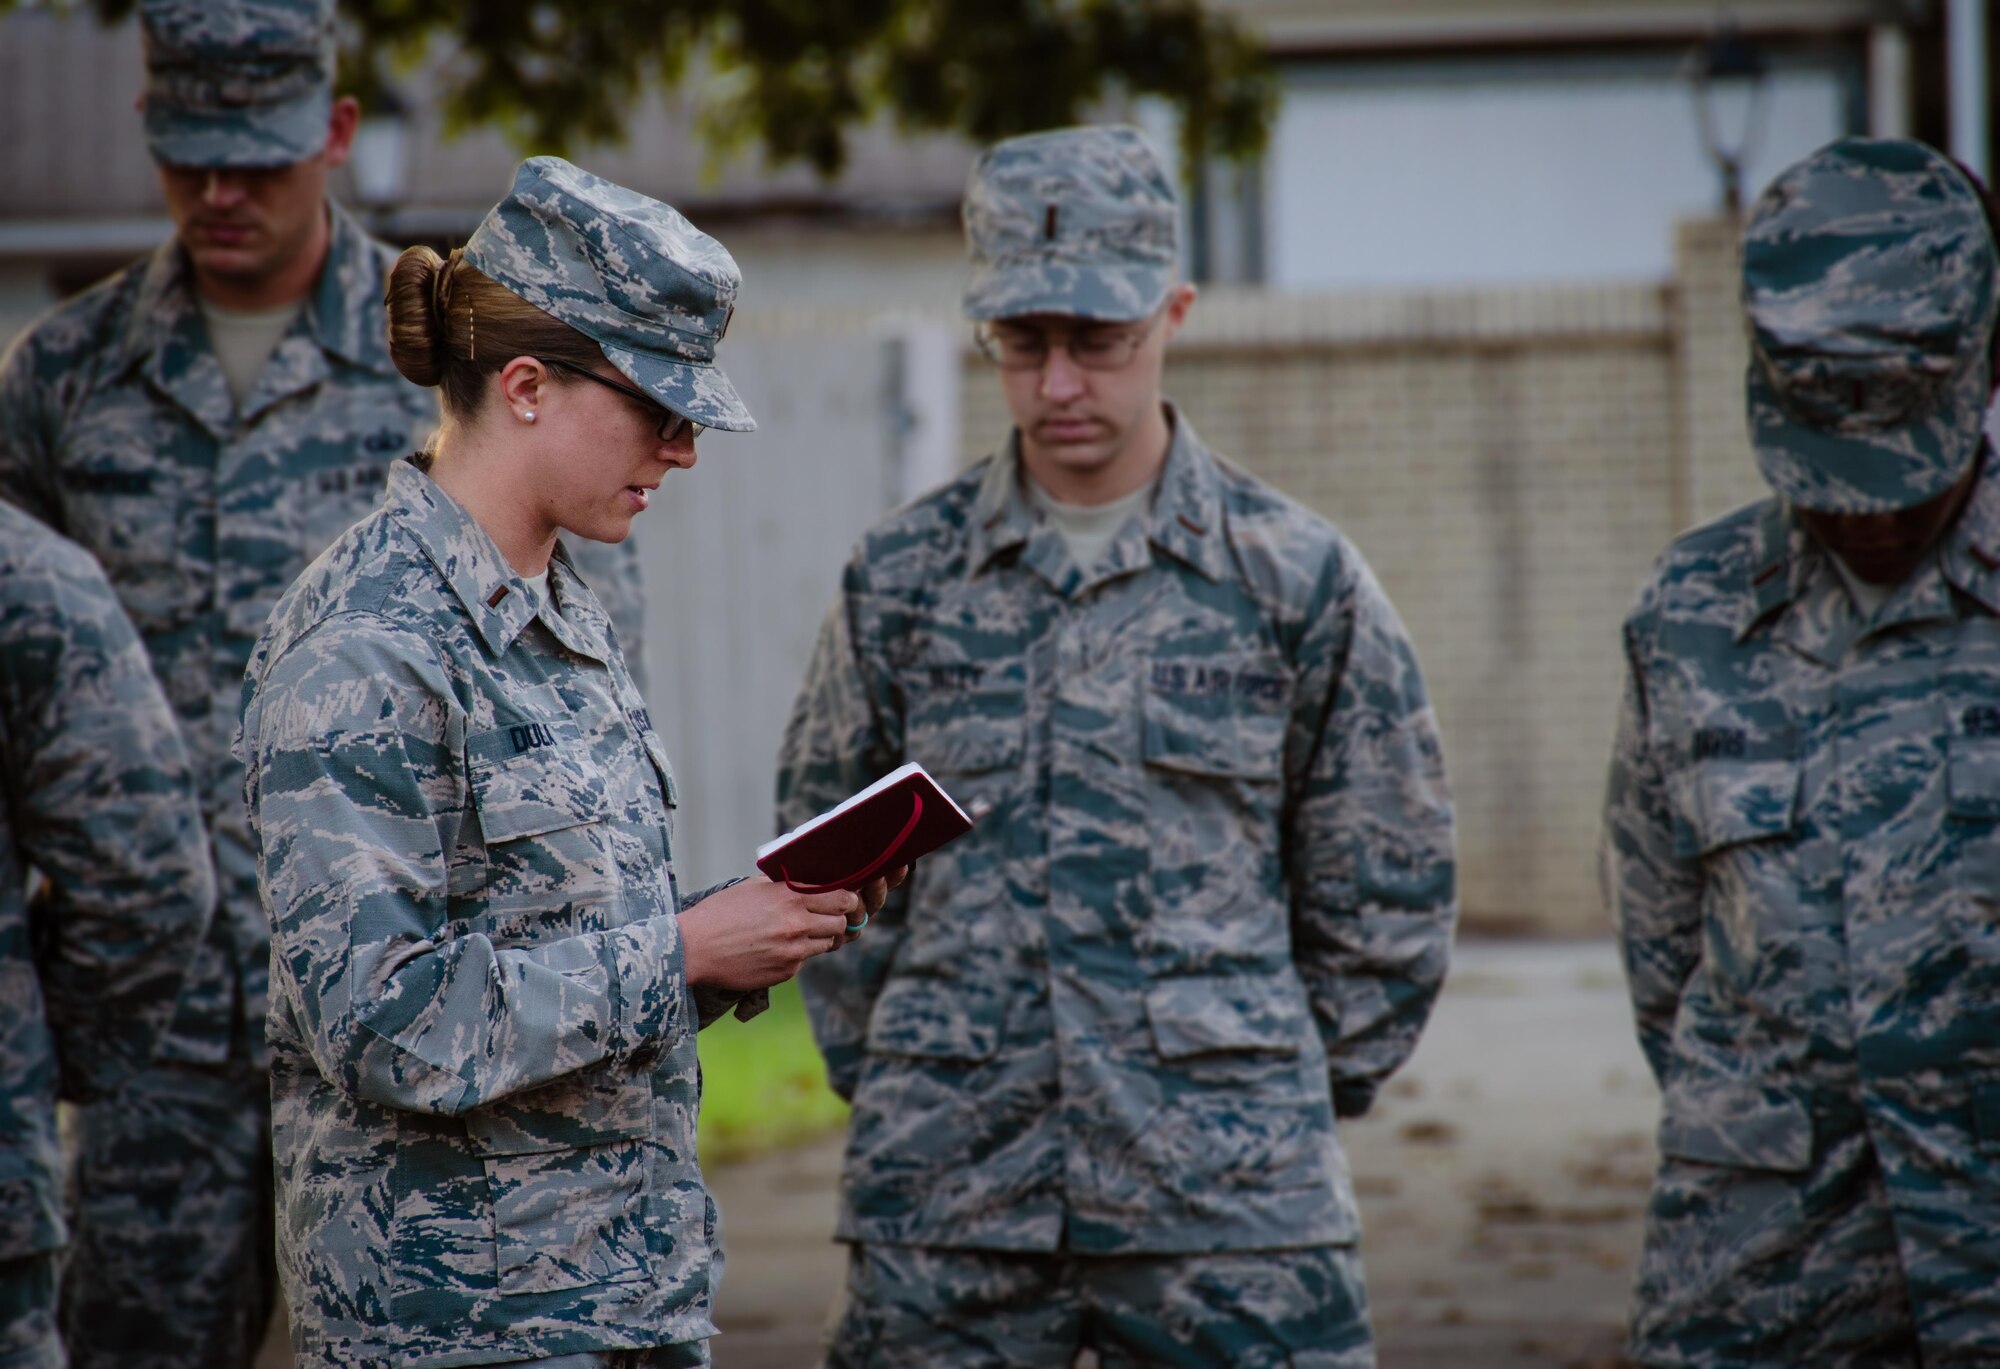 2nd Lt. Chaplain Candidate, Kara Dula reads a morning prayer to the formation of candidates at Robins Air Force Base, Georgia, July 25, 2016. Dula is a participant in the Air Force Reserve Command Chaplain Candidate Intesive Interview program which aims to provide an extensive overview of what the Air Force Reserve mission is as well as a broad overview of the military chaplain corps. During the last week of the AFRC program, the candidates were immersed in fast-paced mobility training conducted by active-duty instructors from the 5th Combat Communications Squadron Support. (U.S. Air Force photo/Tech. Sgt. Kelly Goonan)